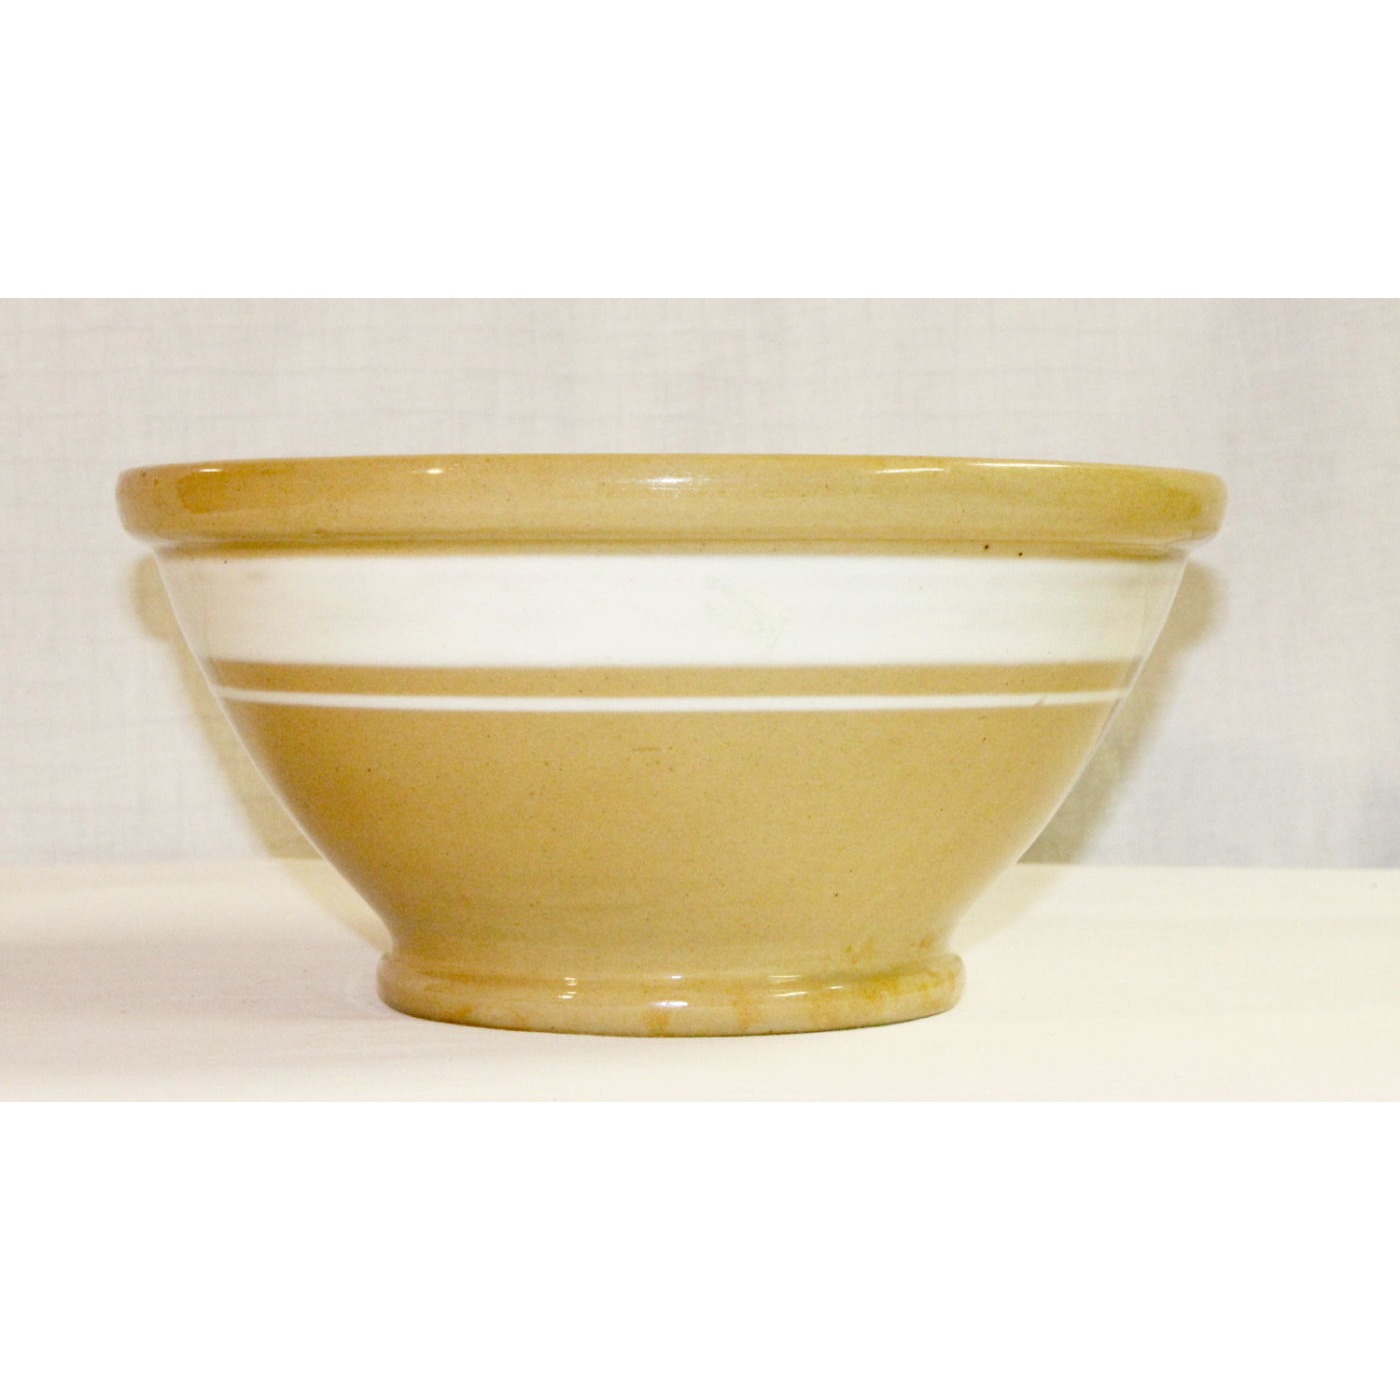 Unusual Wide White Banded Yellow Ware Bowl